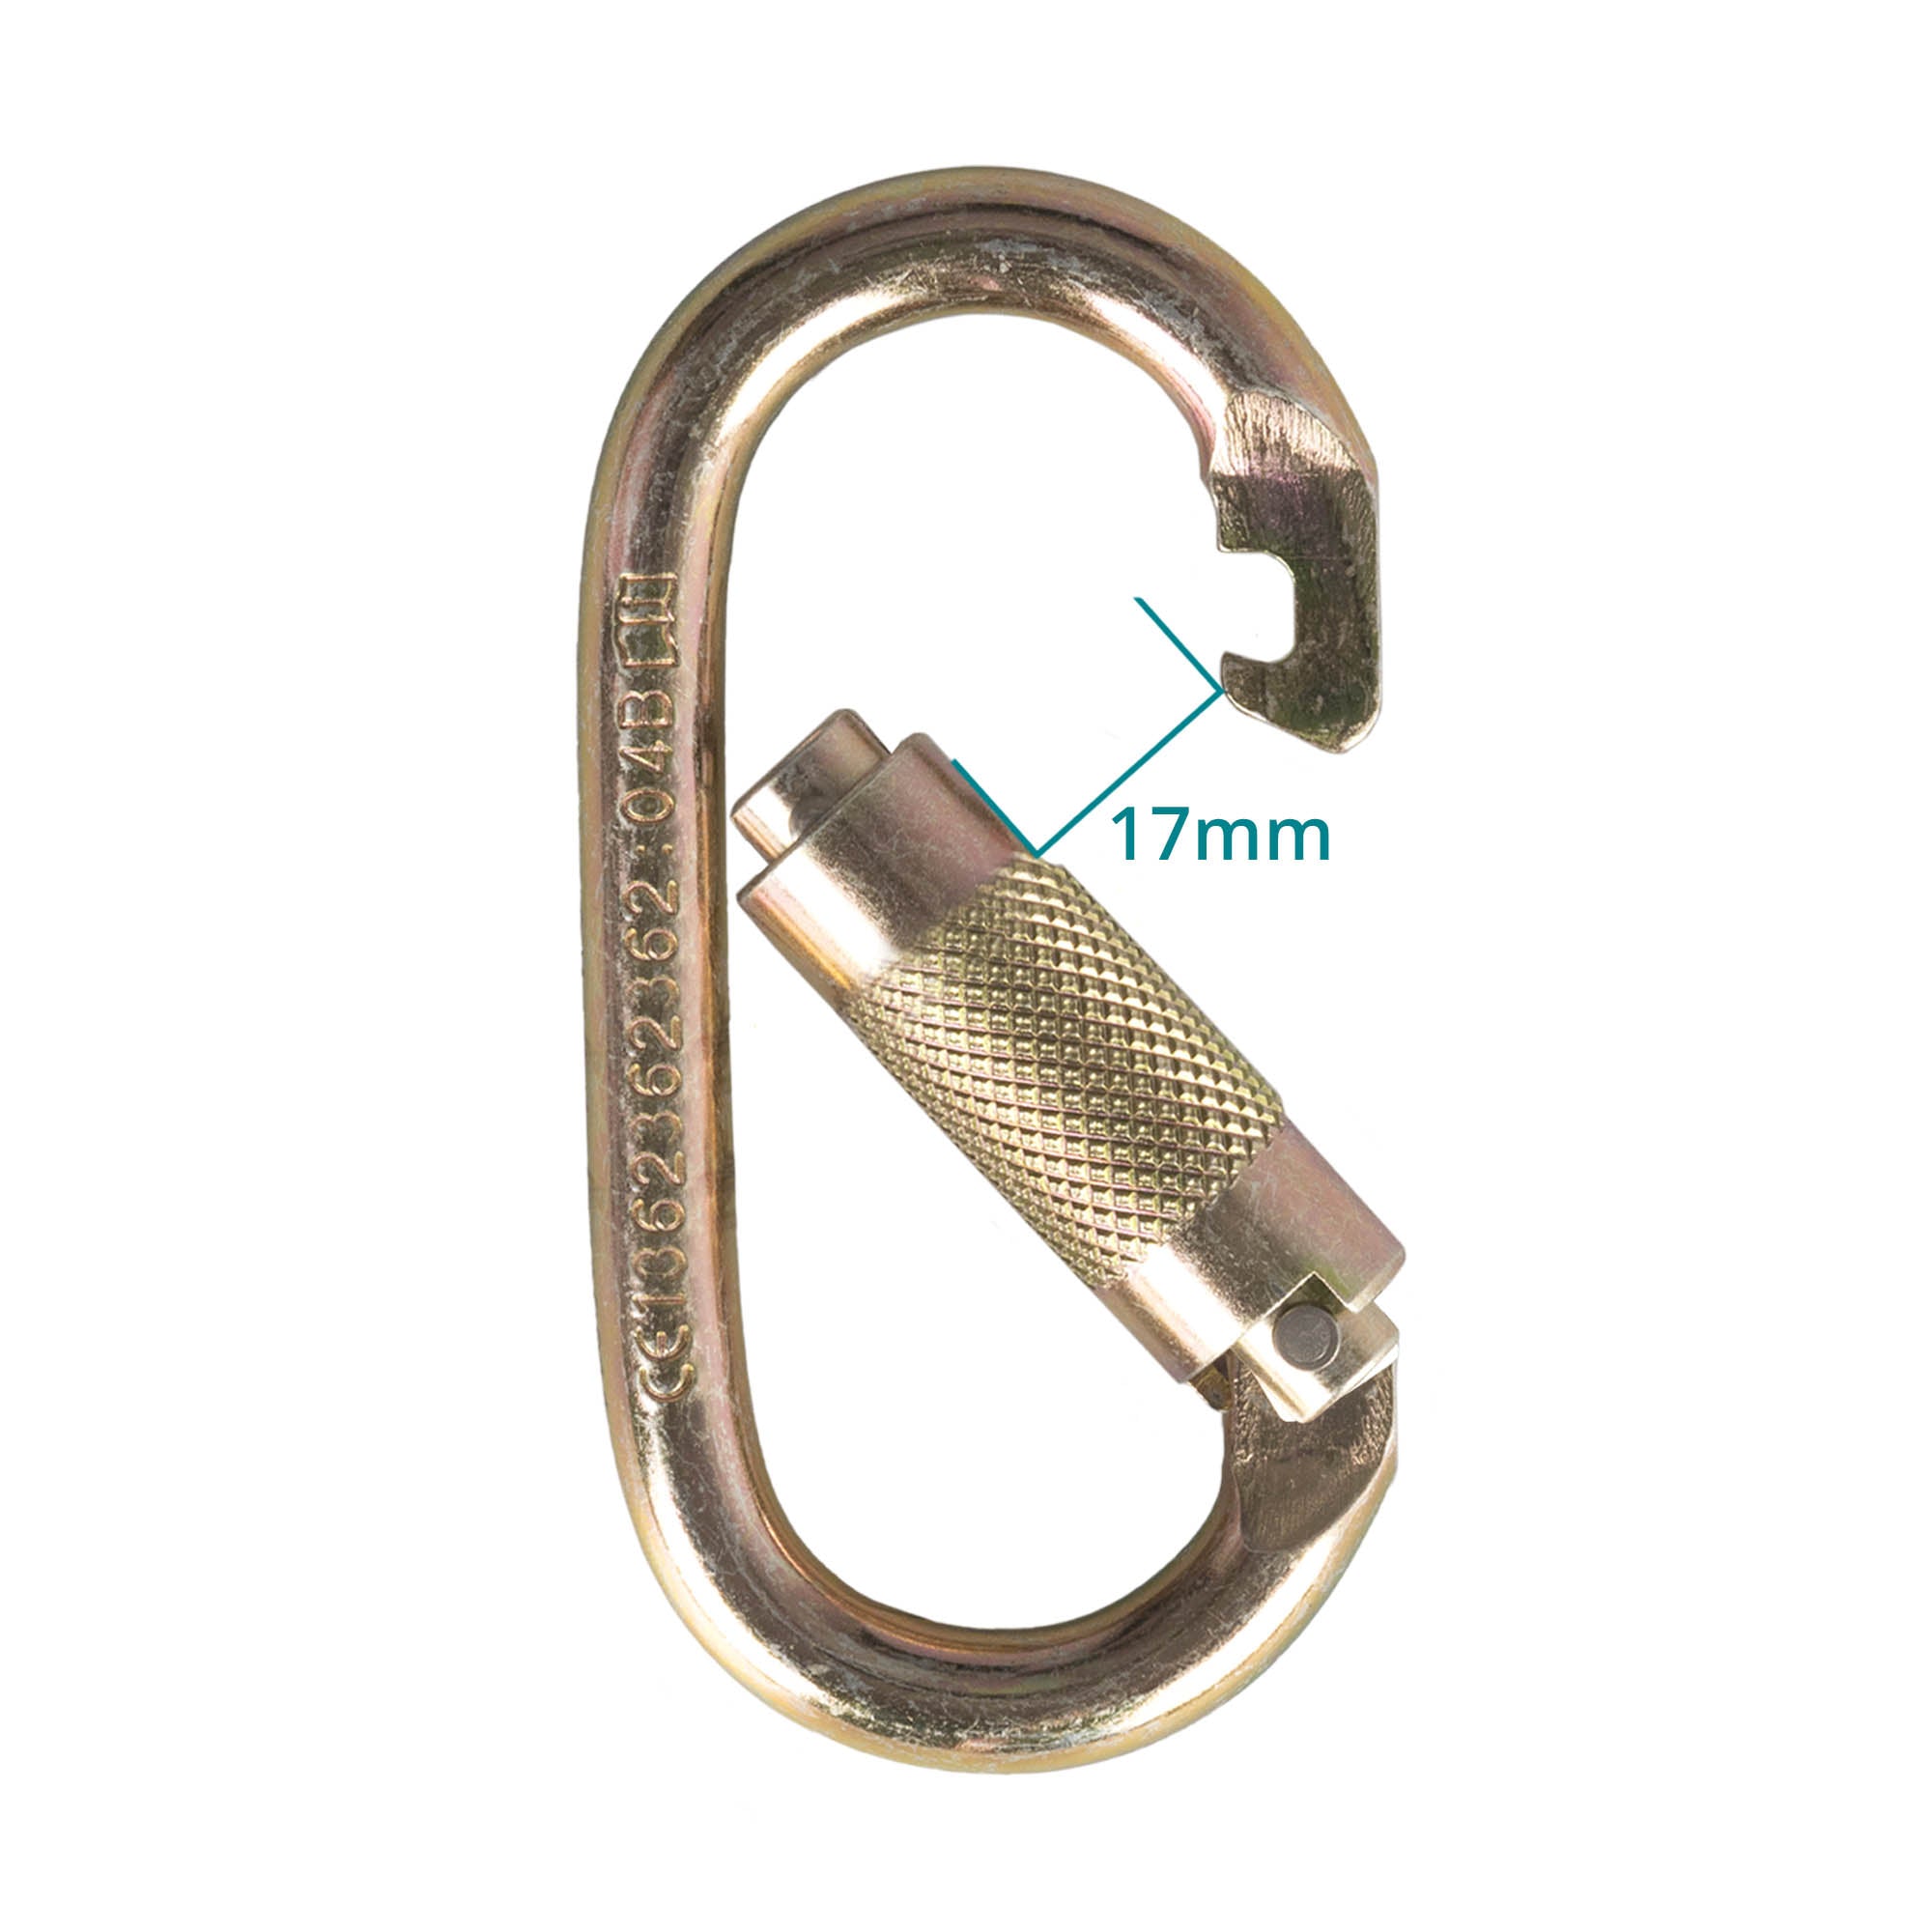 Prodigy double action carabiner gate measurement